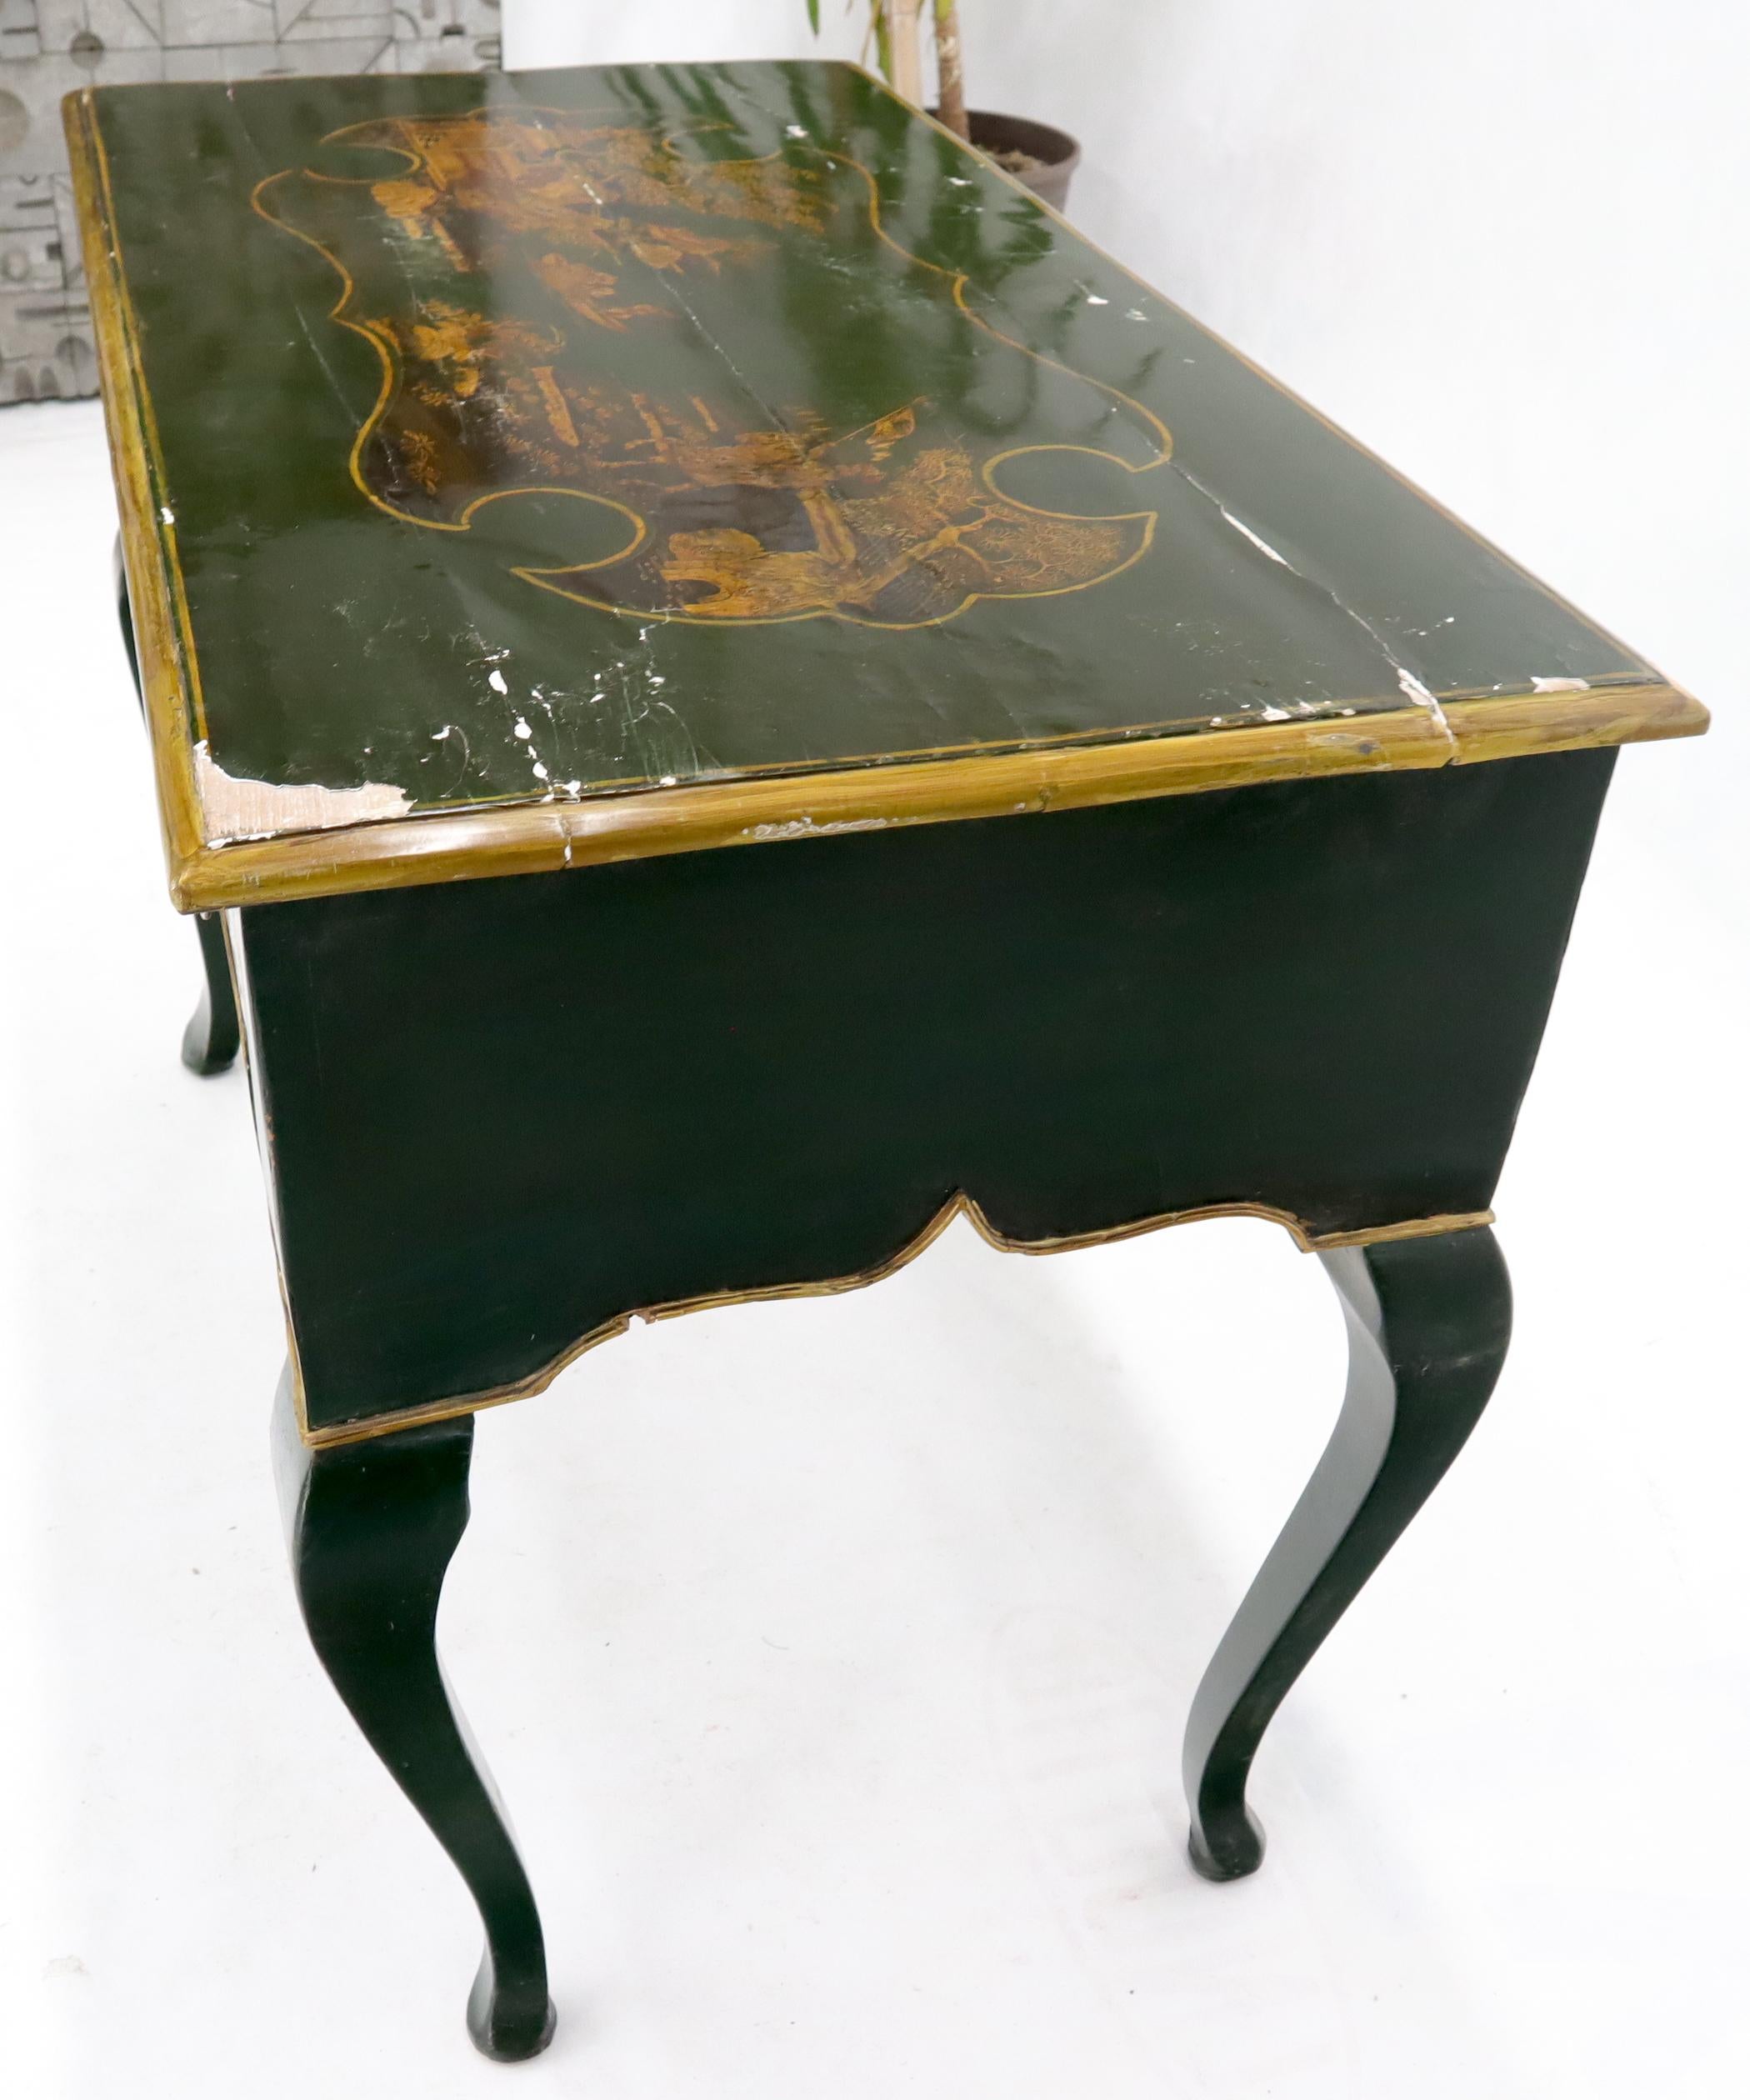 Hand-Painted Antique 18th Century Hand Decorated Chinoiserie Desk